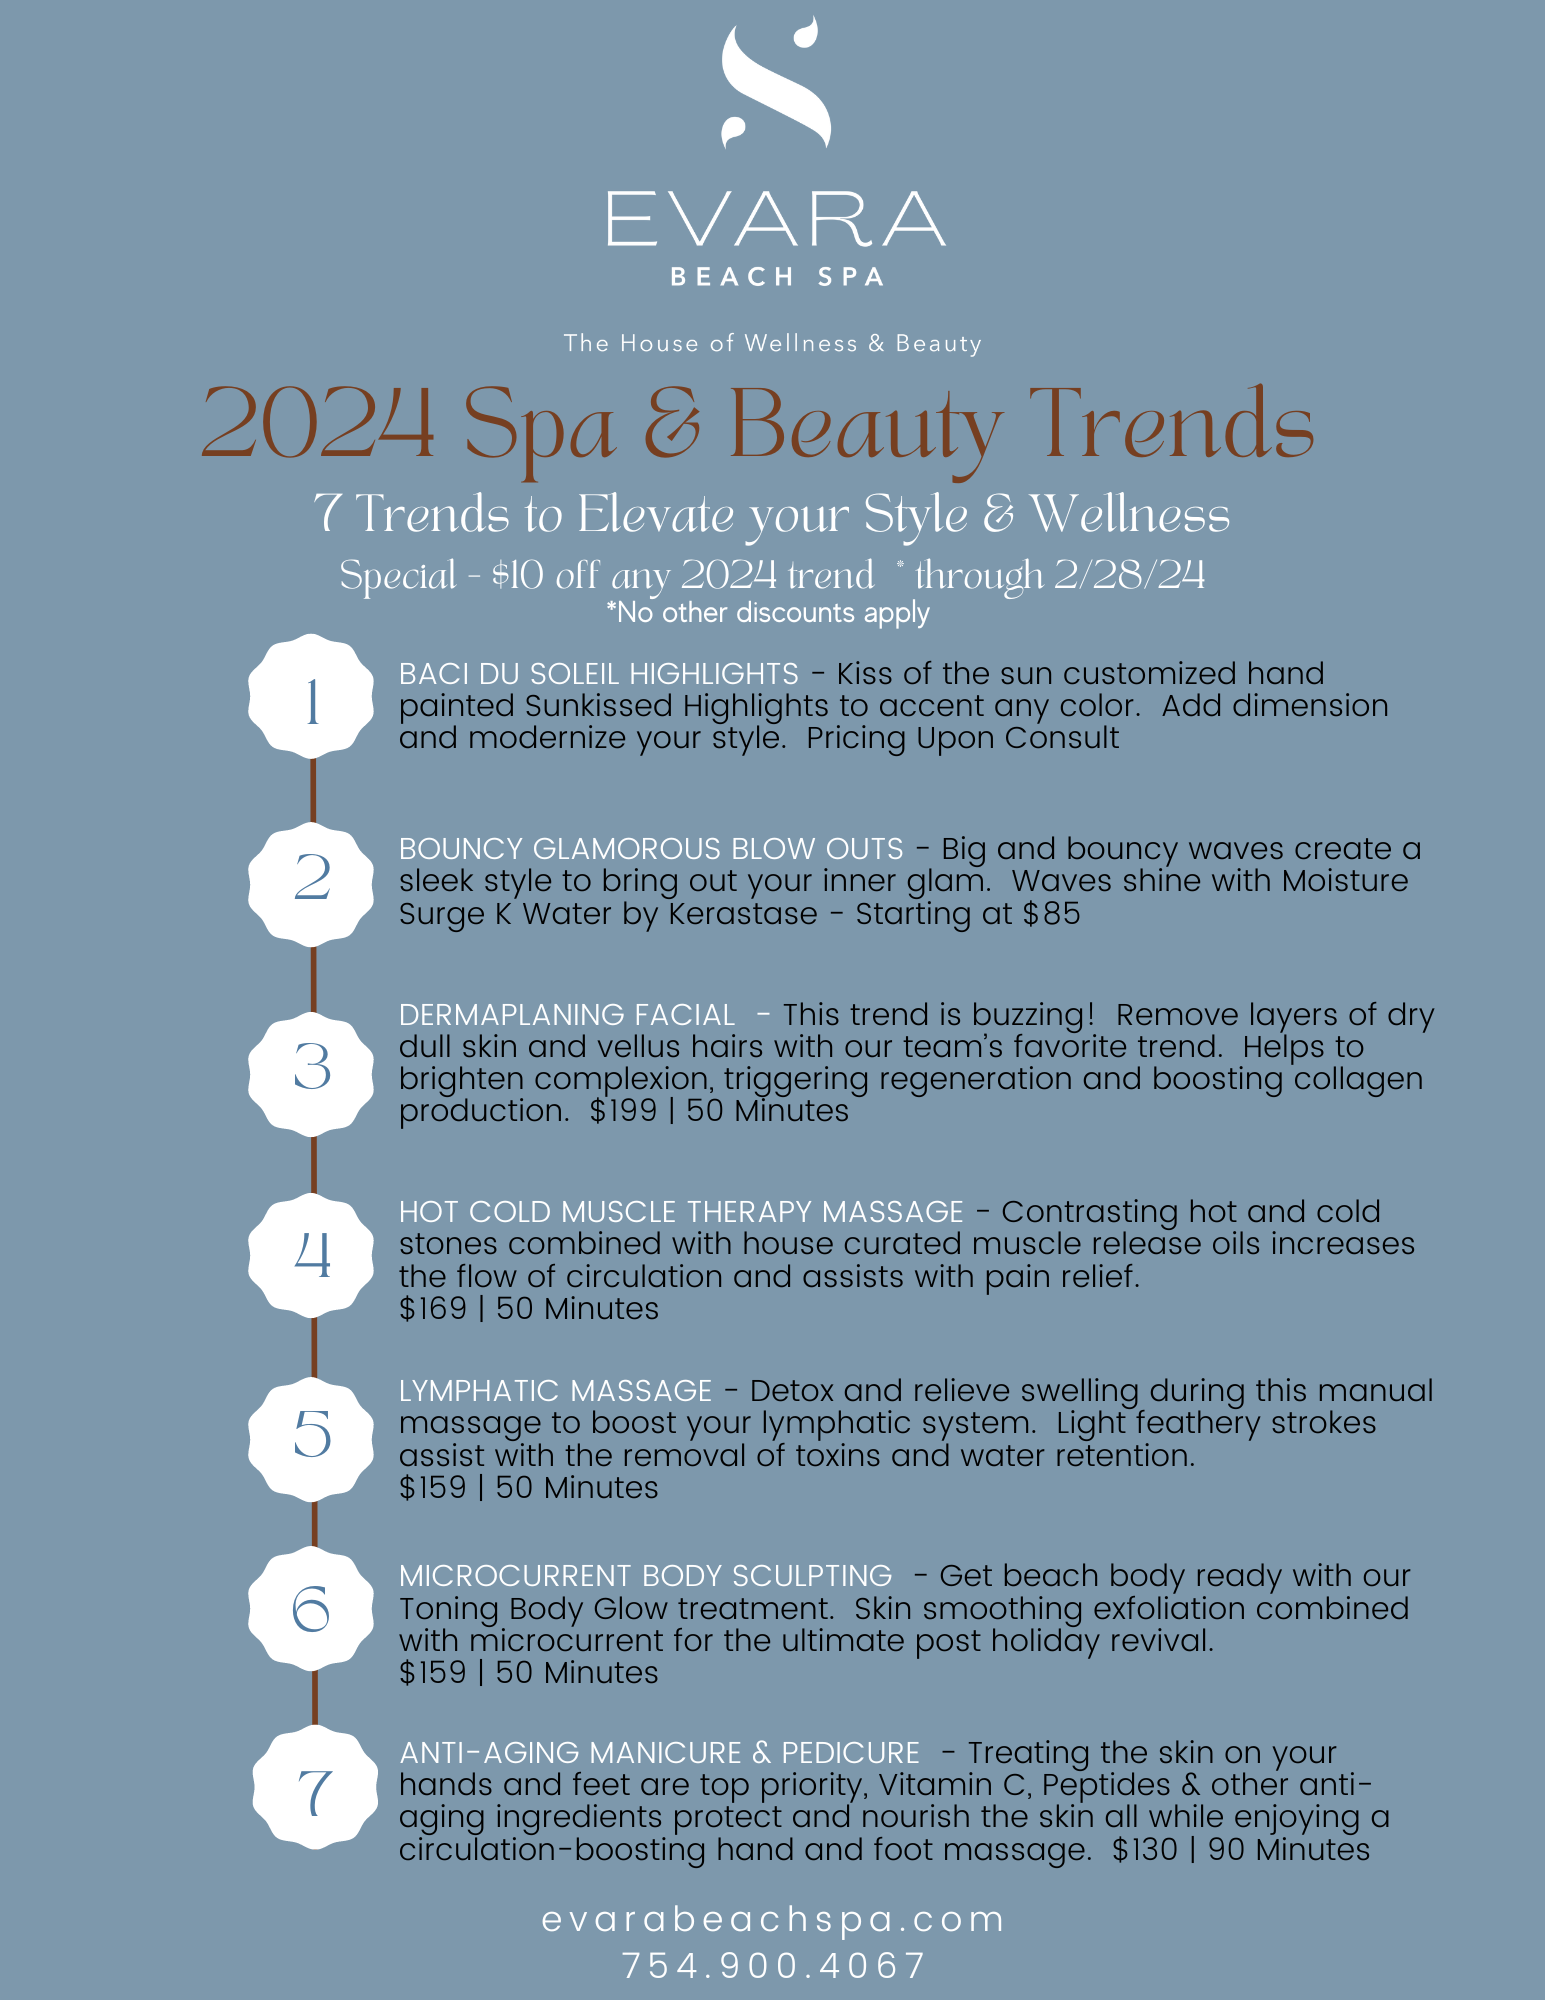 Spa and Wellness trends for 2024